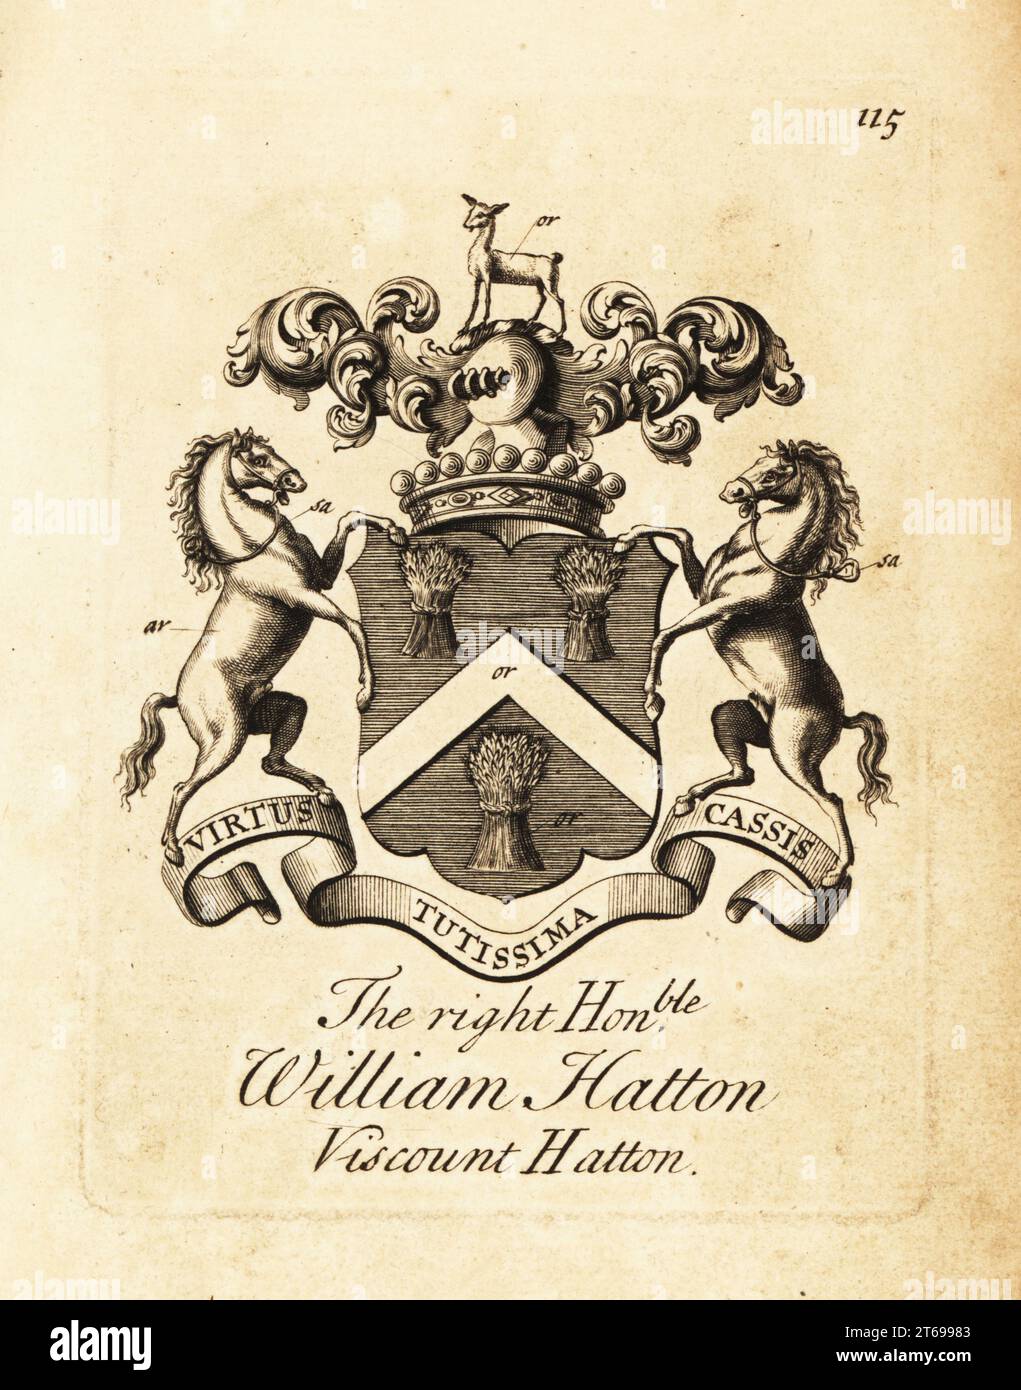 Coat of arms of the Right Honourable William Hatton, 1st Viscount Hatton (16321706). Copperplate engraving by Andrew Johnston after C. Gardiner from Notitia Anglicana, Shewing the Achievements of all the English Nobility, Andrew Johnson, the Strand, London, 1724. Stock Photo